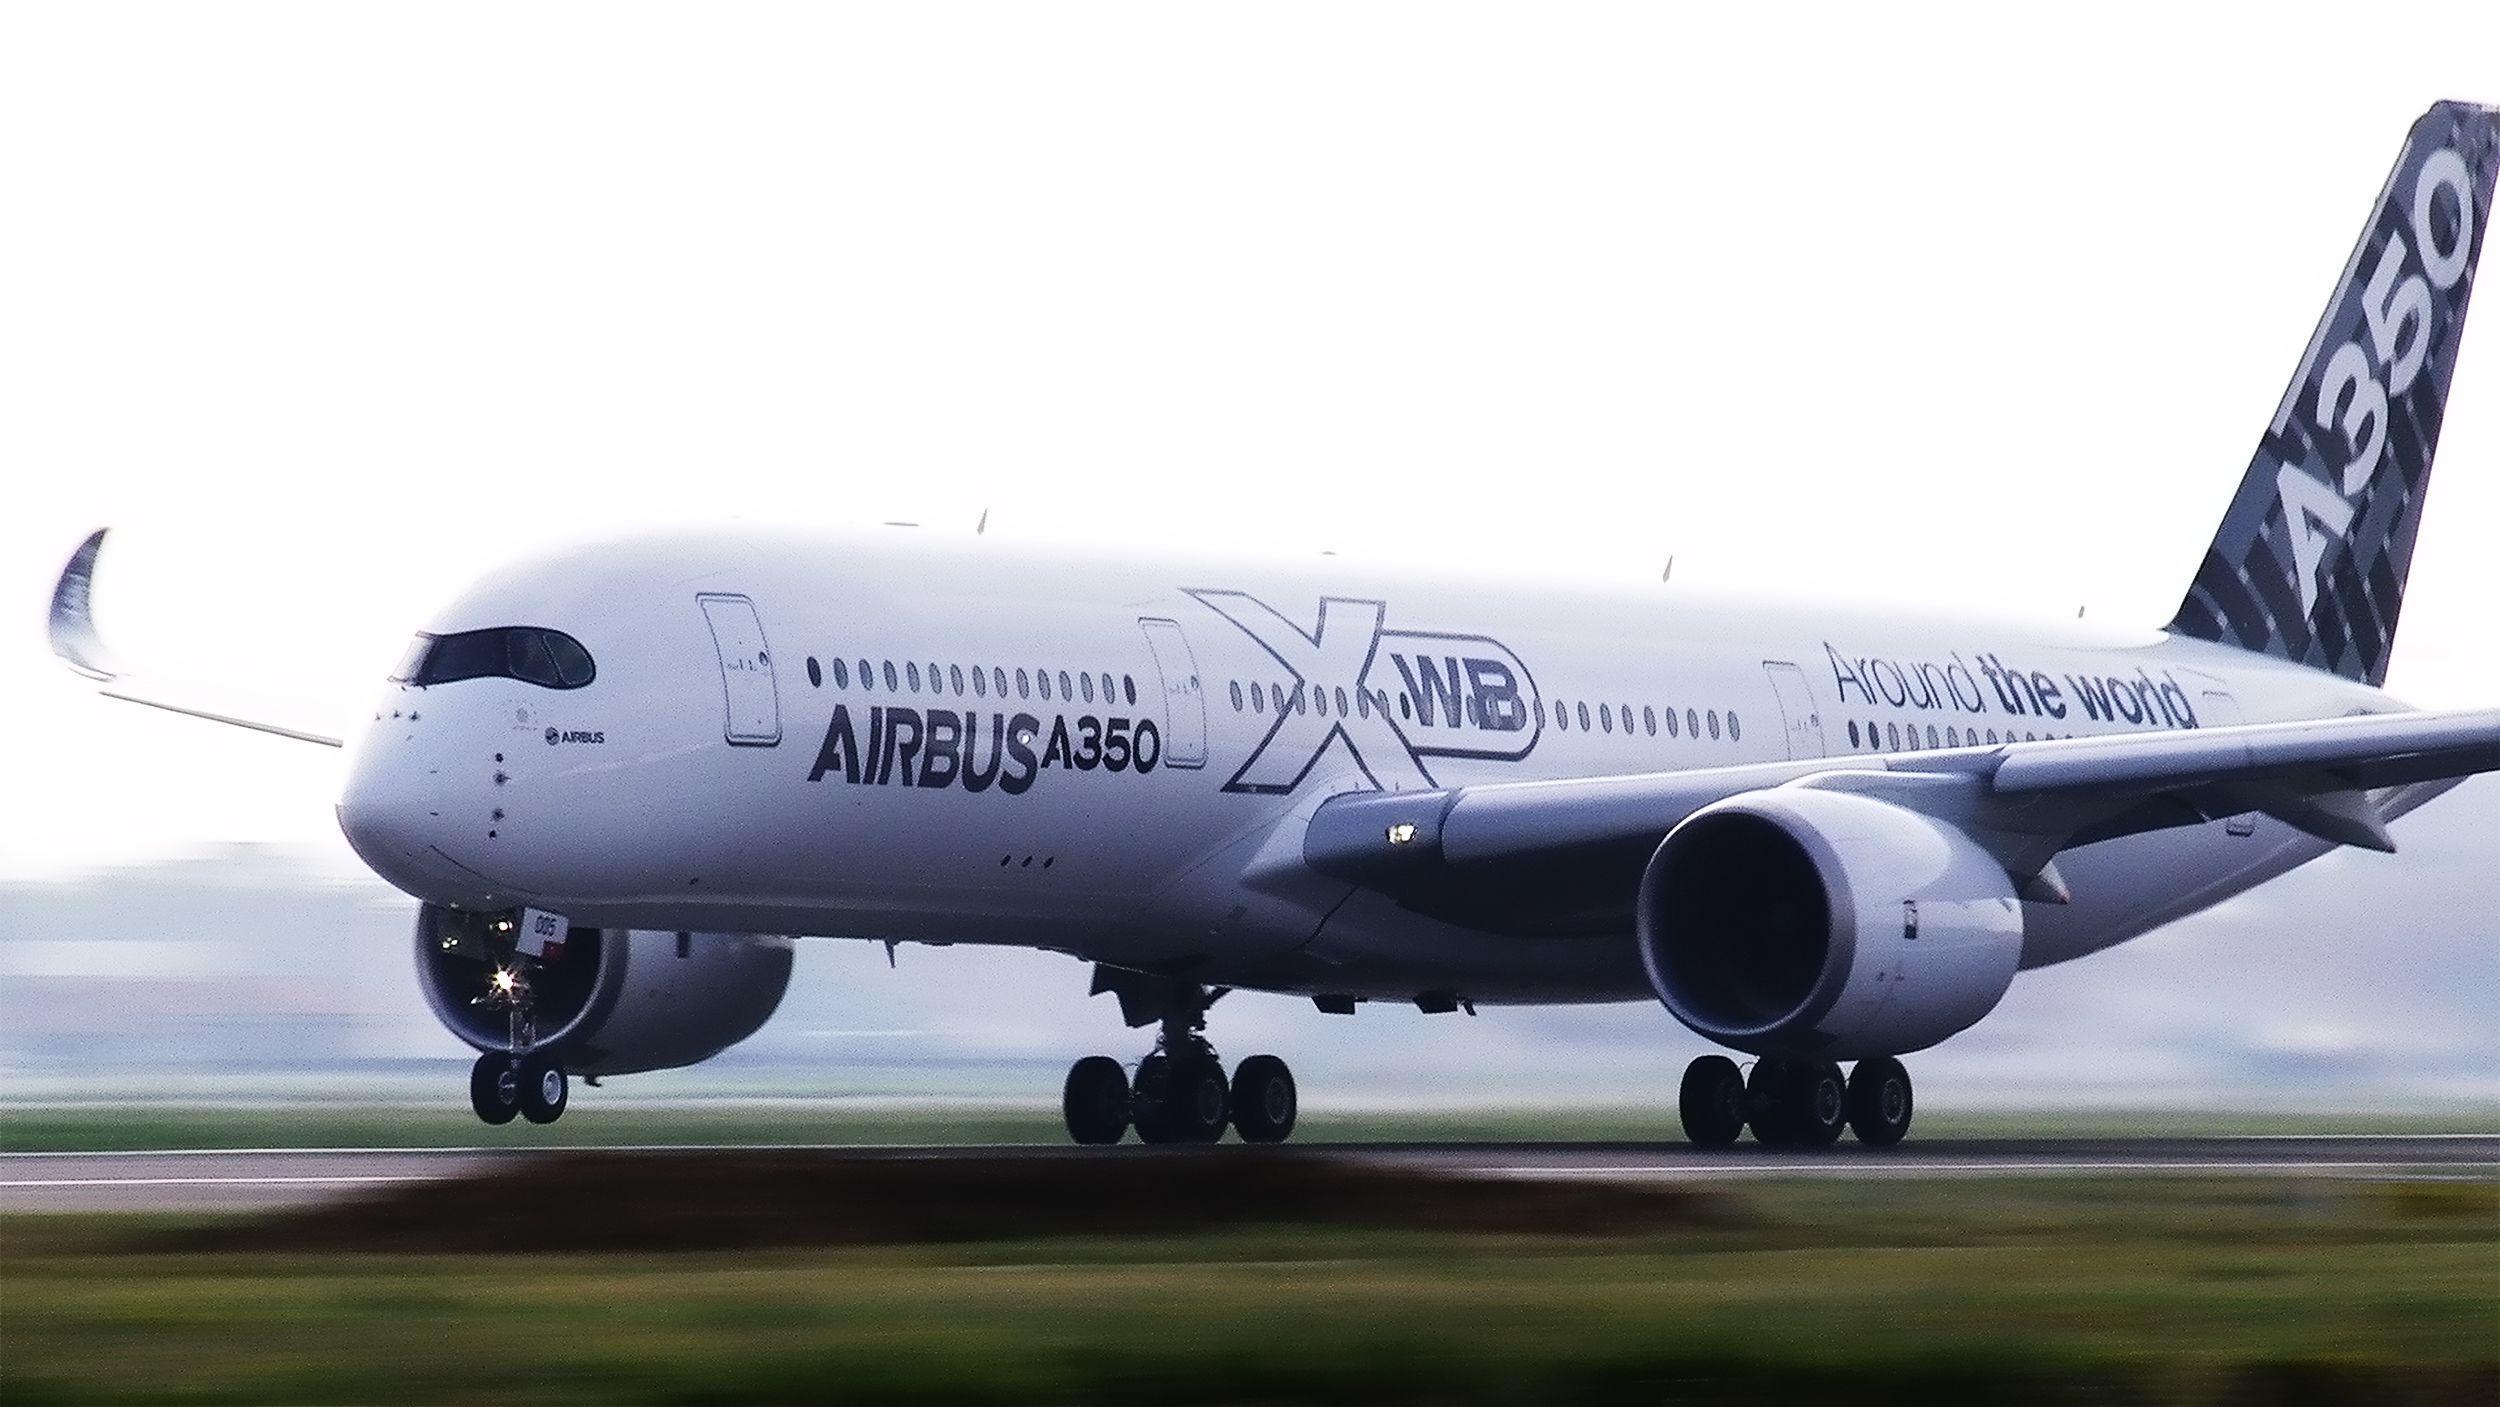 Airbus A350 Pictures  Download Free Images on Unsplash